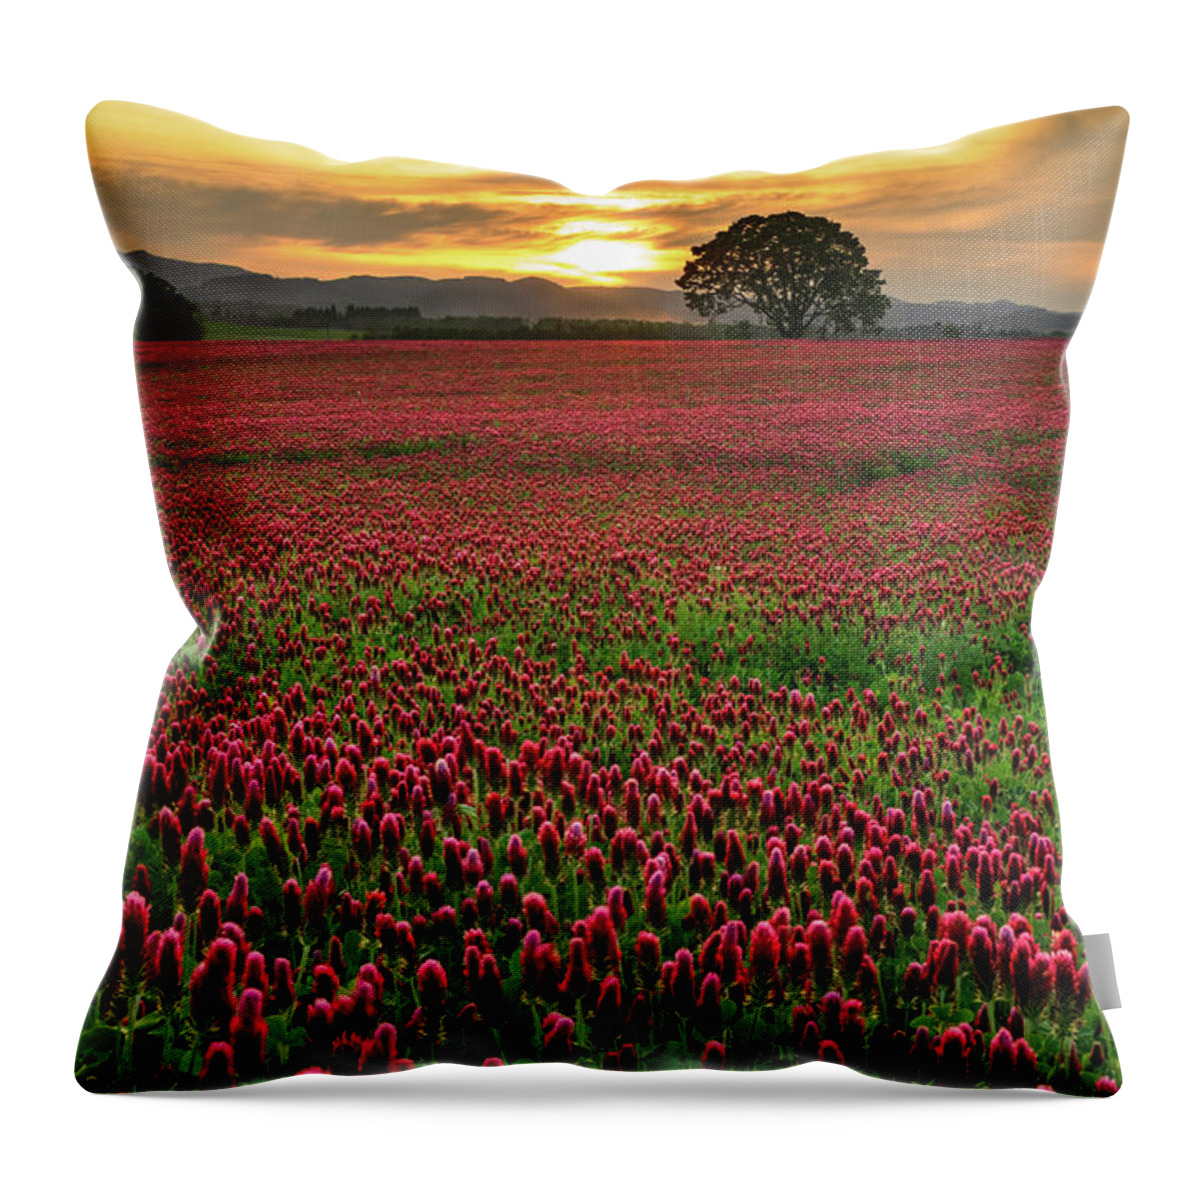 Scenics Throw Pillow featuring the photograph Field Of Crimson Clover With Lone Oak by Jason Harris